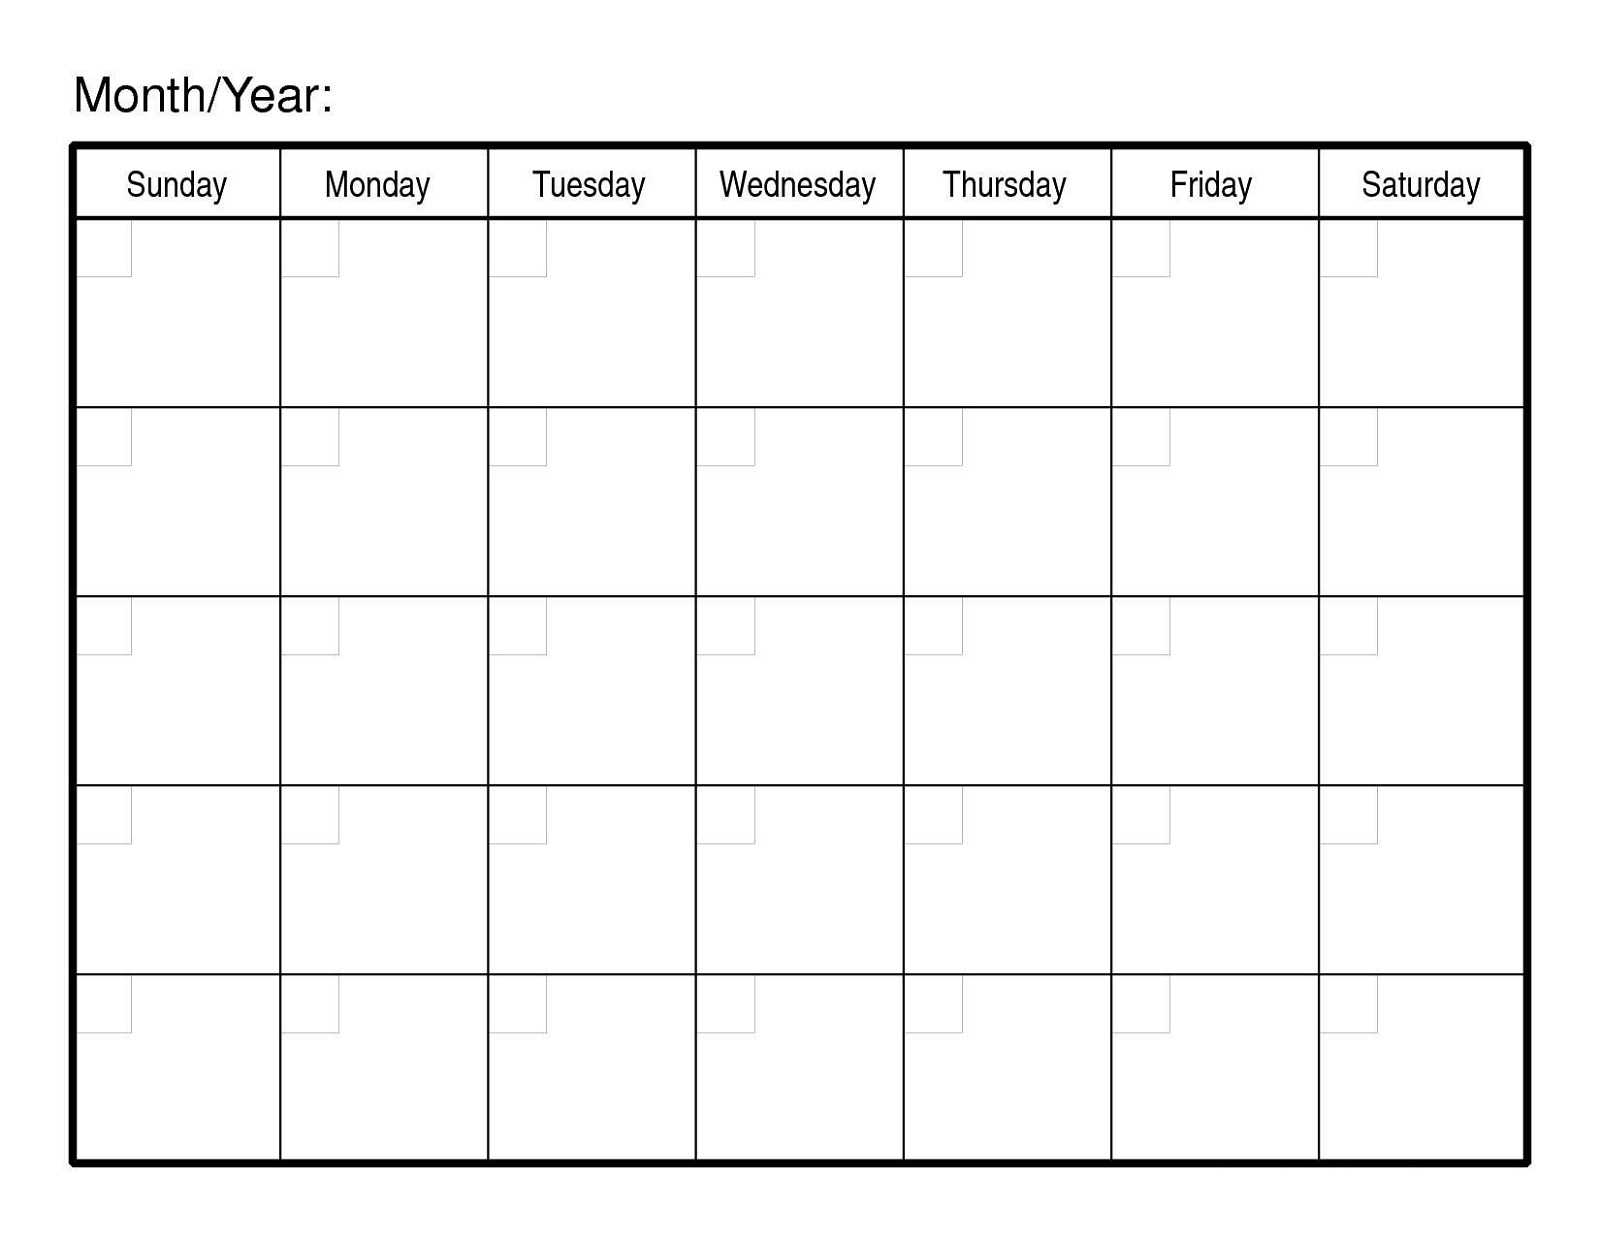 Month At A Glance Calendar Printable Blank Downloadable With Regard To Month At A Glance Blank Calendar Template